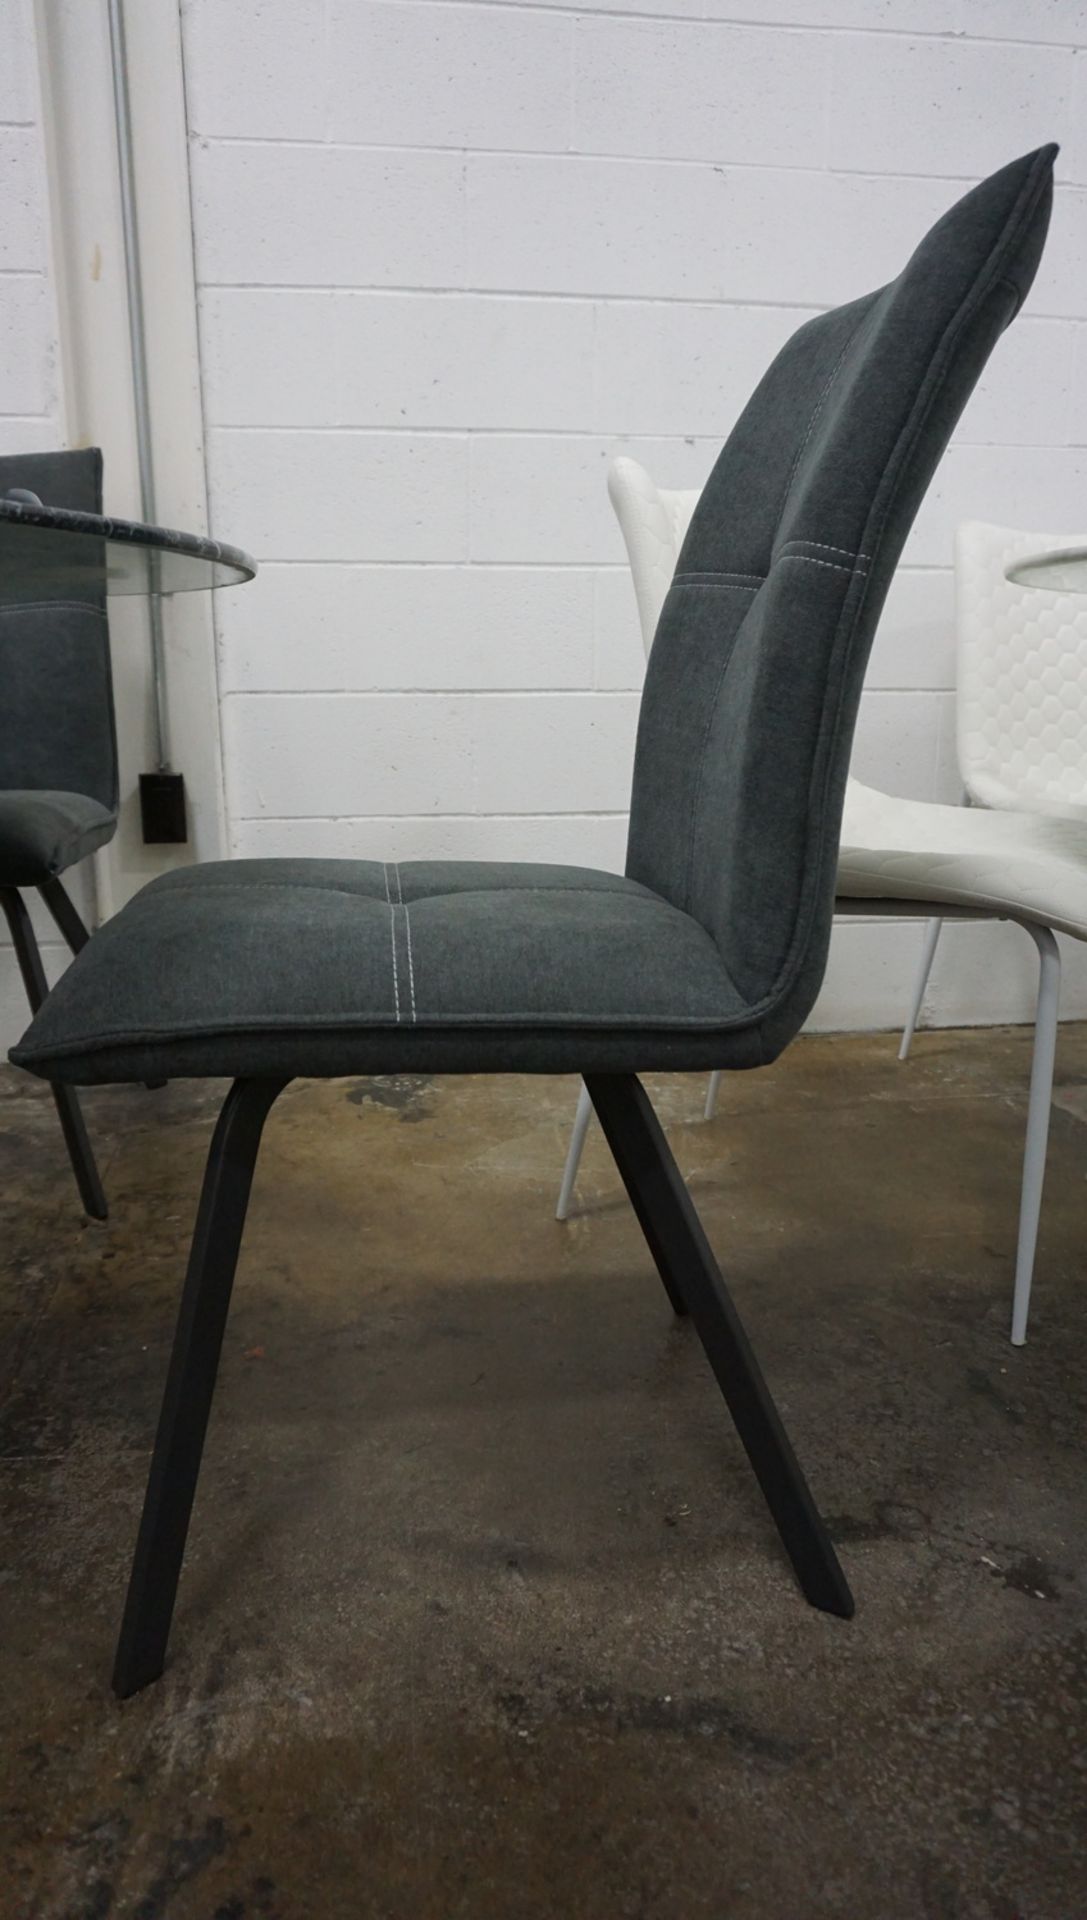 UNITS - GREY FABRIC UPHOLSTERED W/ WHITE STITCH DINING CHAIRS - Image 2 of 2